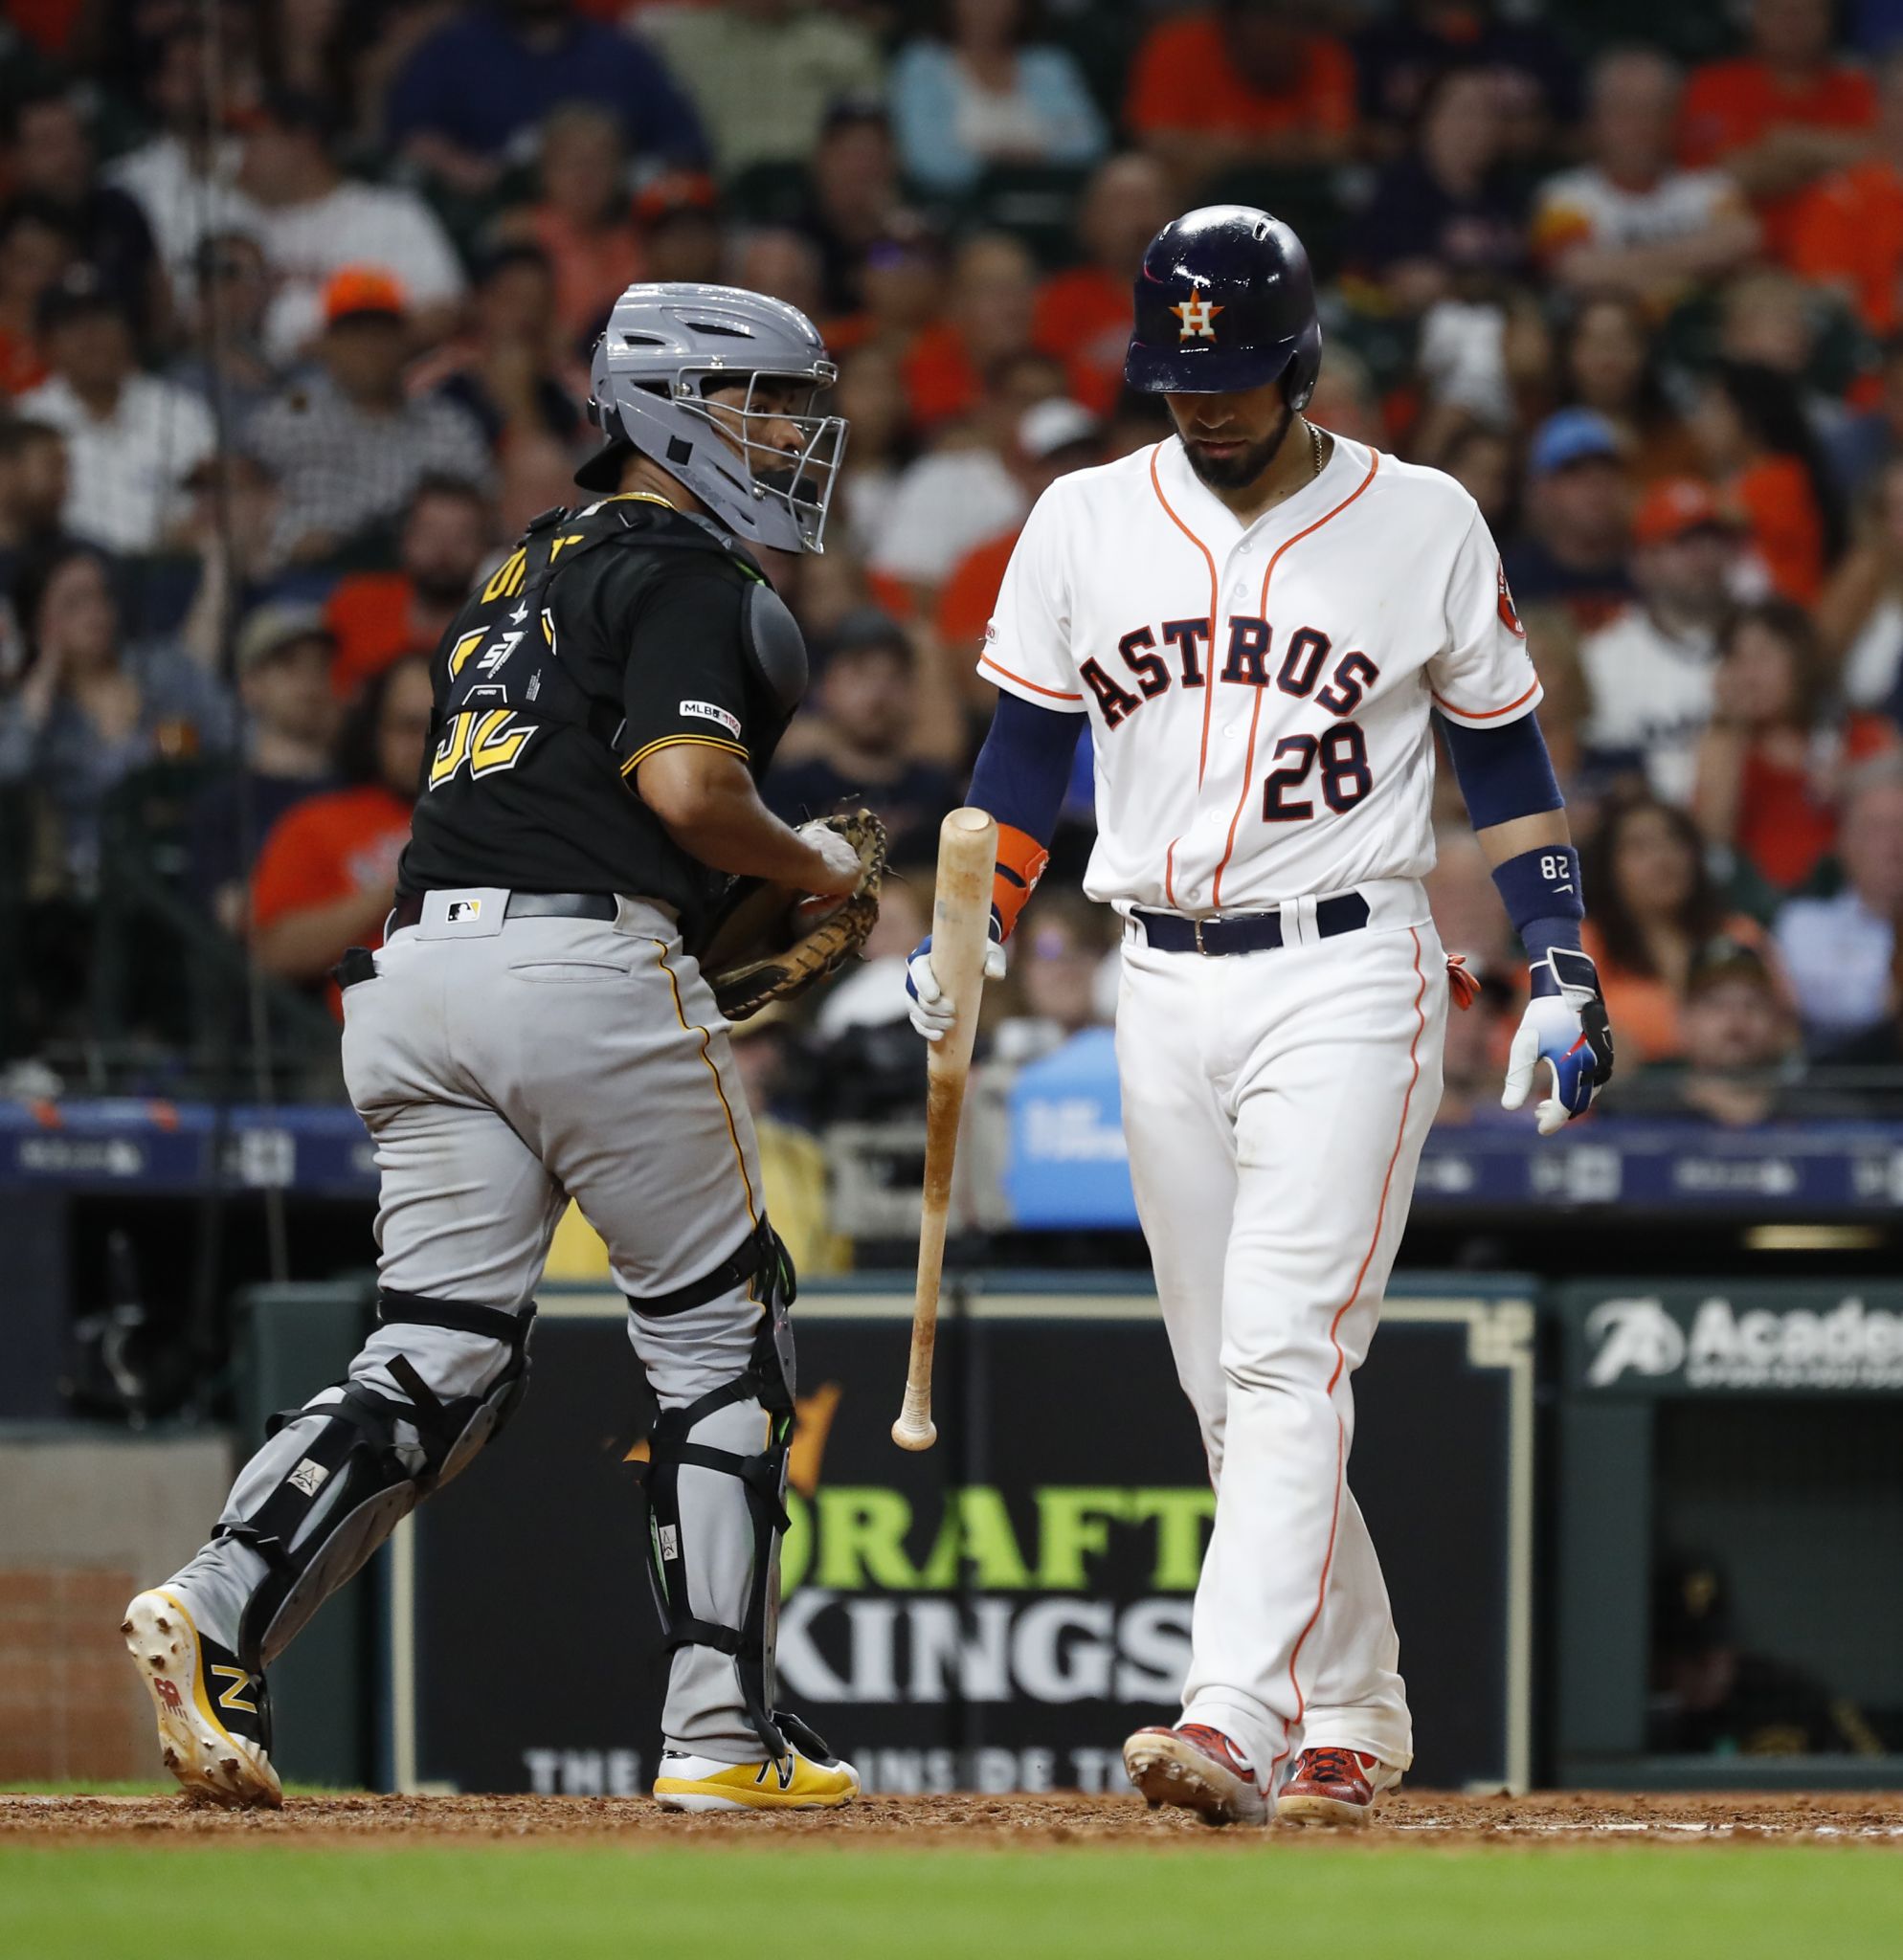 Gurriel, Cole help Astros to 5-1 win over Pirates